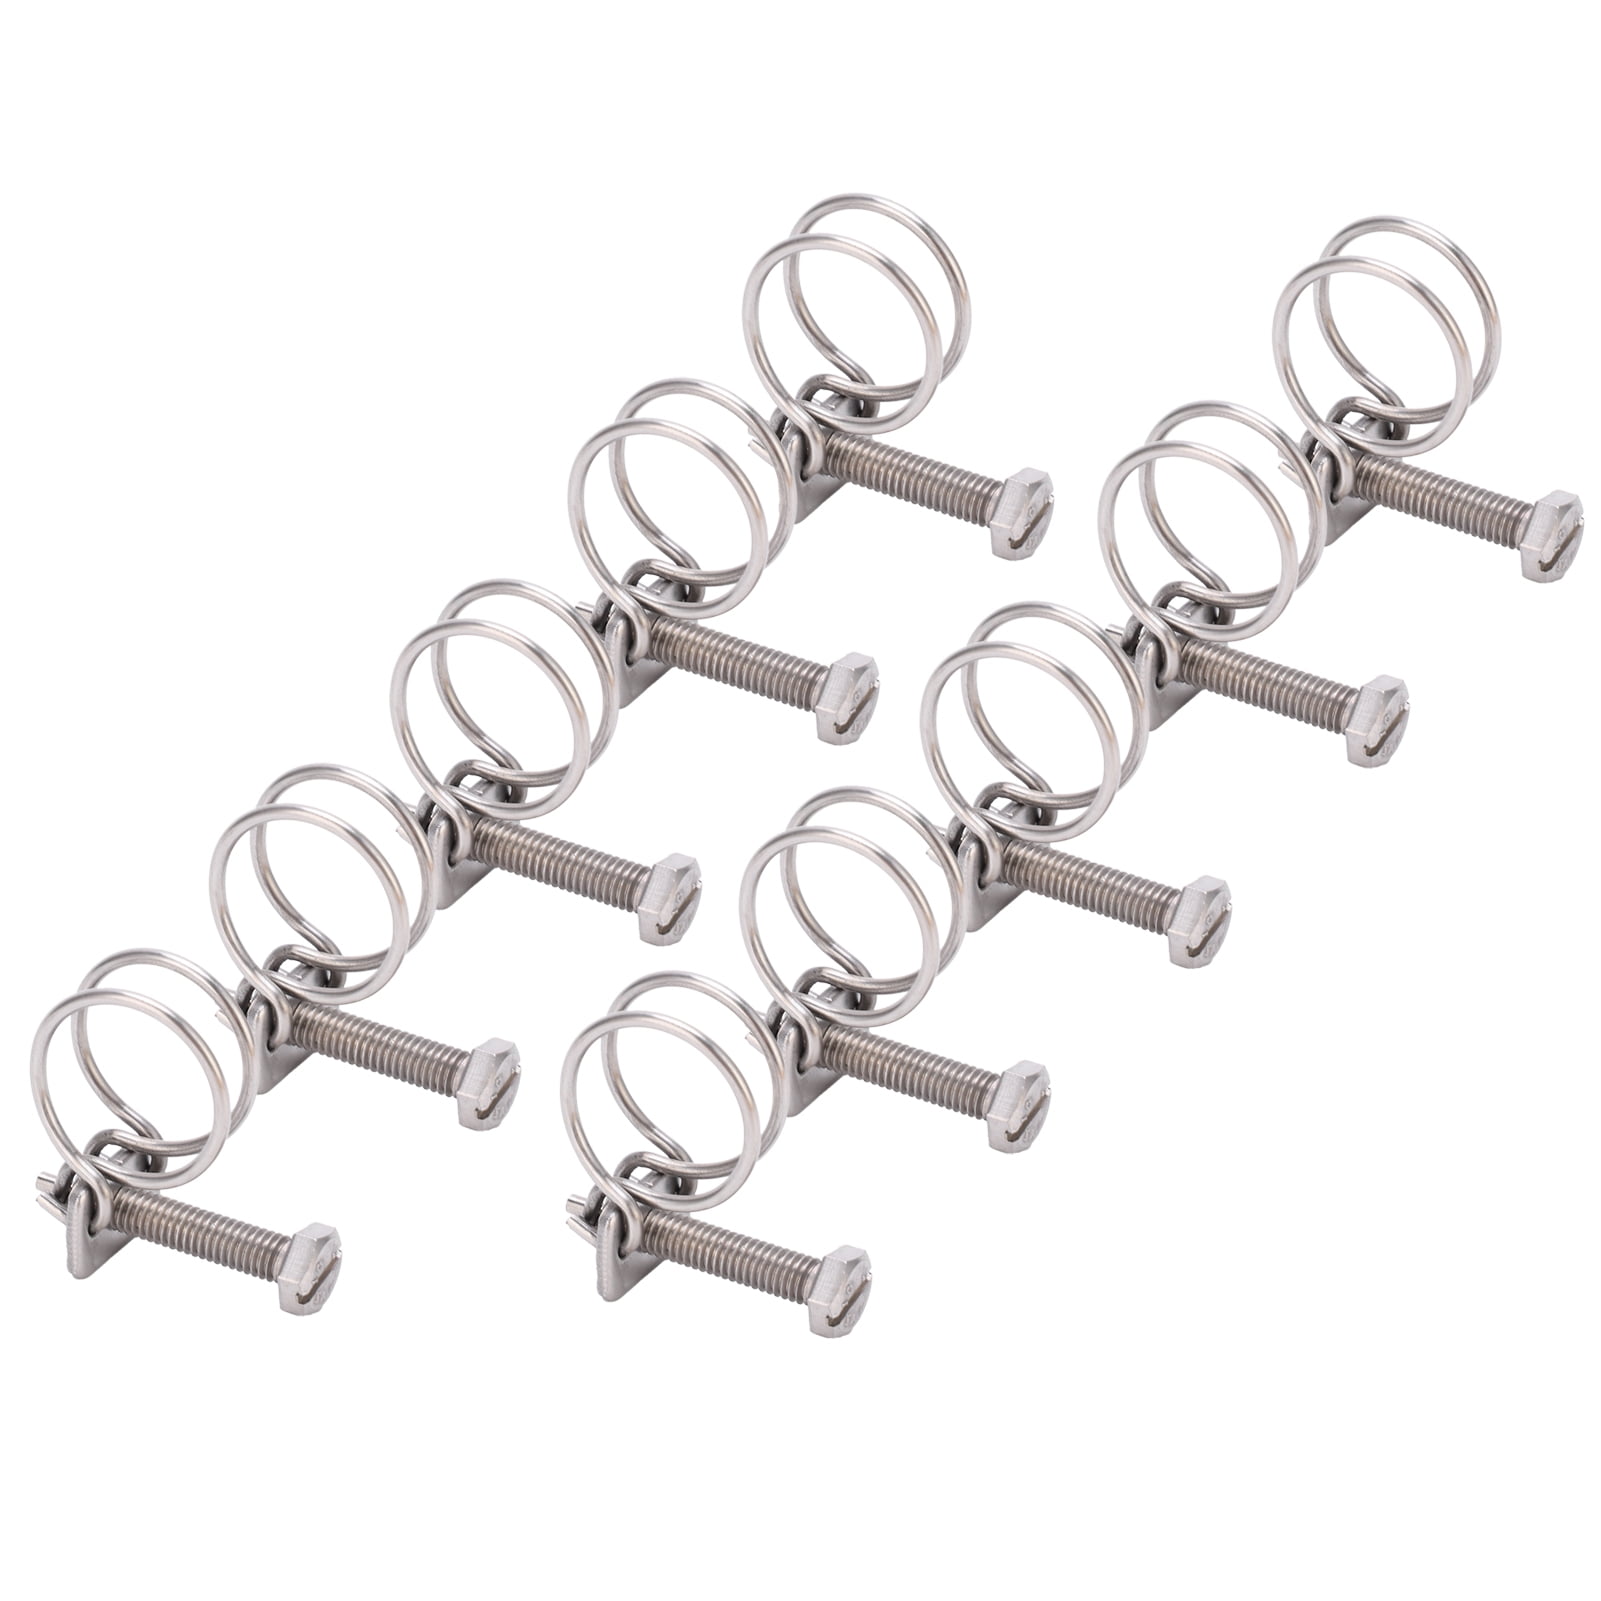 GONGYEZUDOACT Drying Rack Stand For Stainless